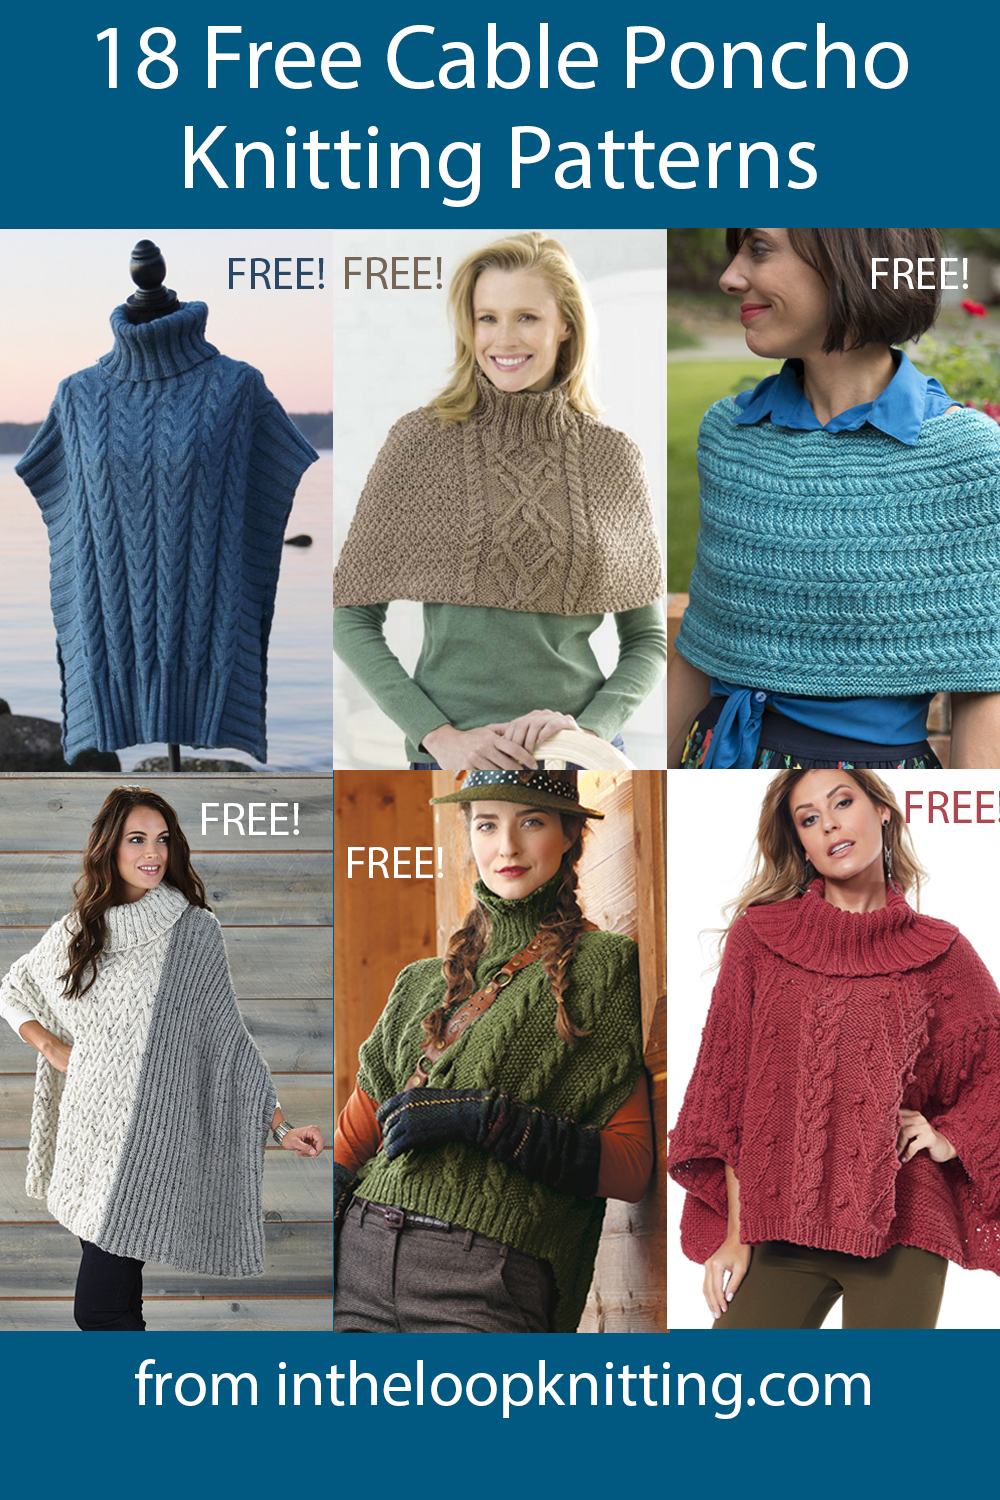 Cable Poncho Knitting Patterns